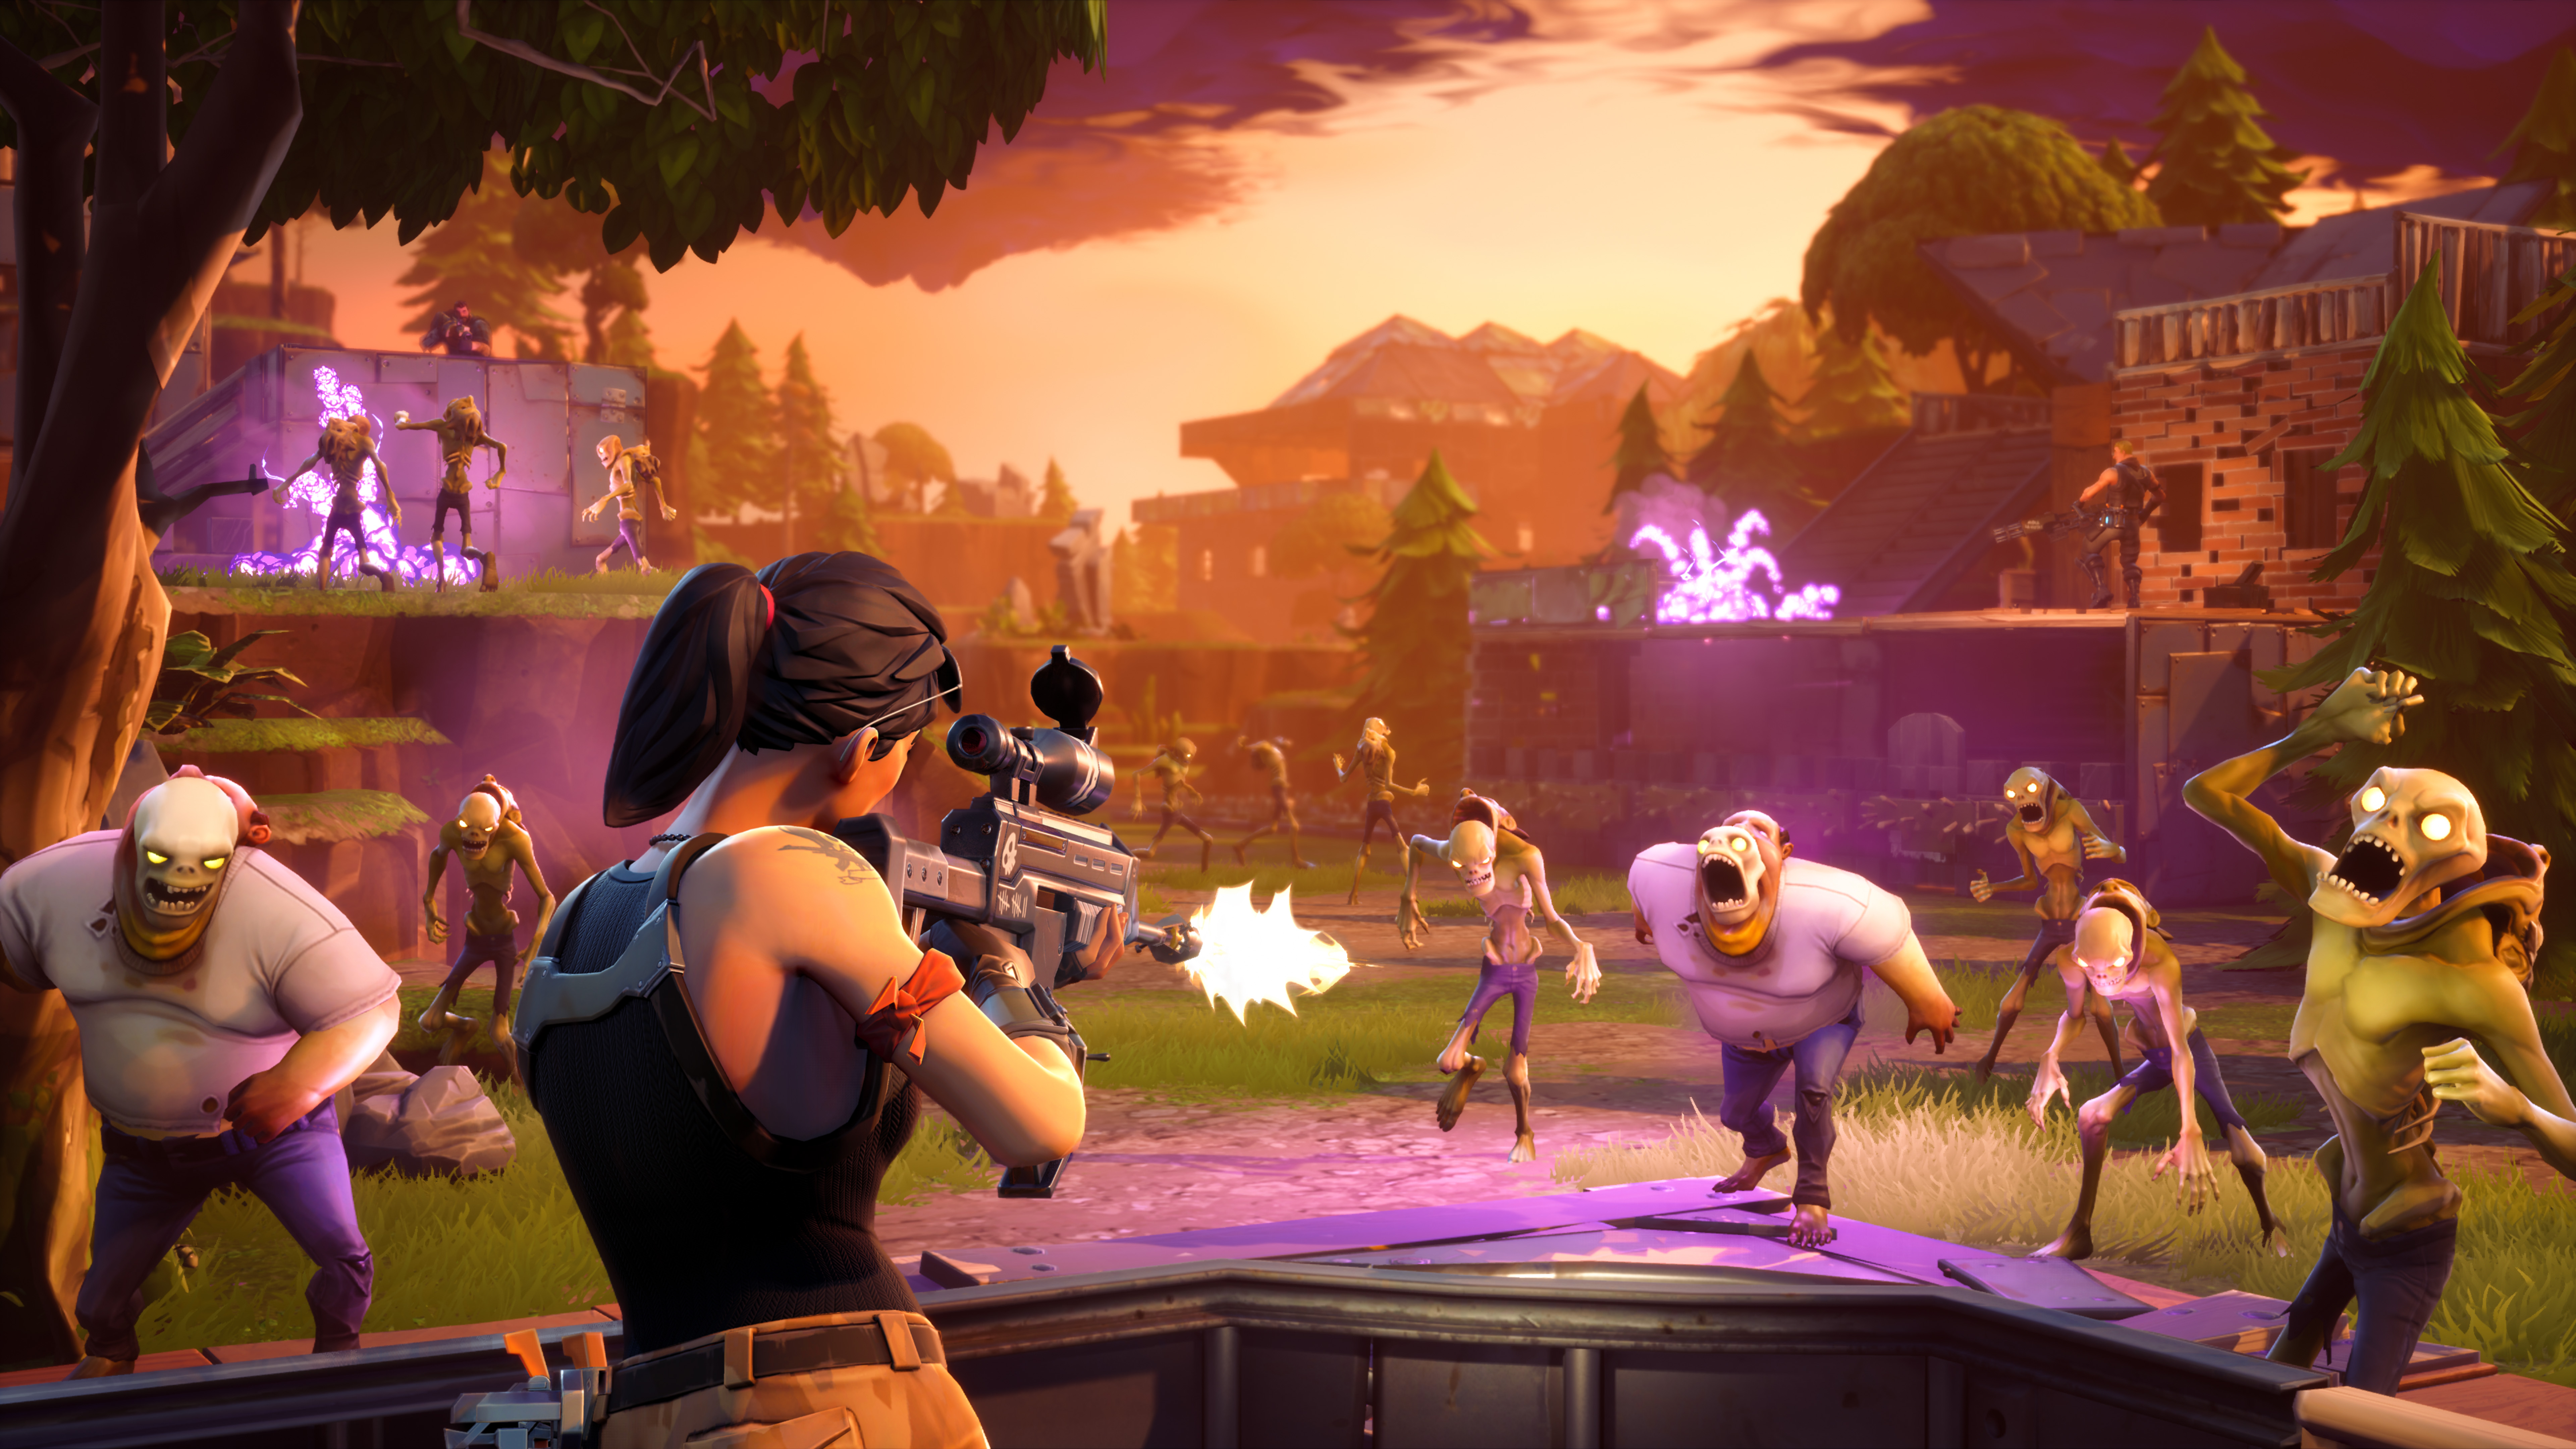 Fortnite Poisons A Potentially Great Game With Agonizing F2p Limits - fortnite looks and feels like this nicely staged promo pic of in game action however so many free to play annoyances drag this build a base